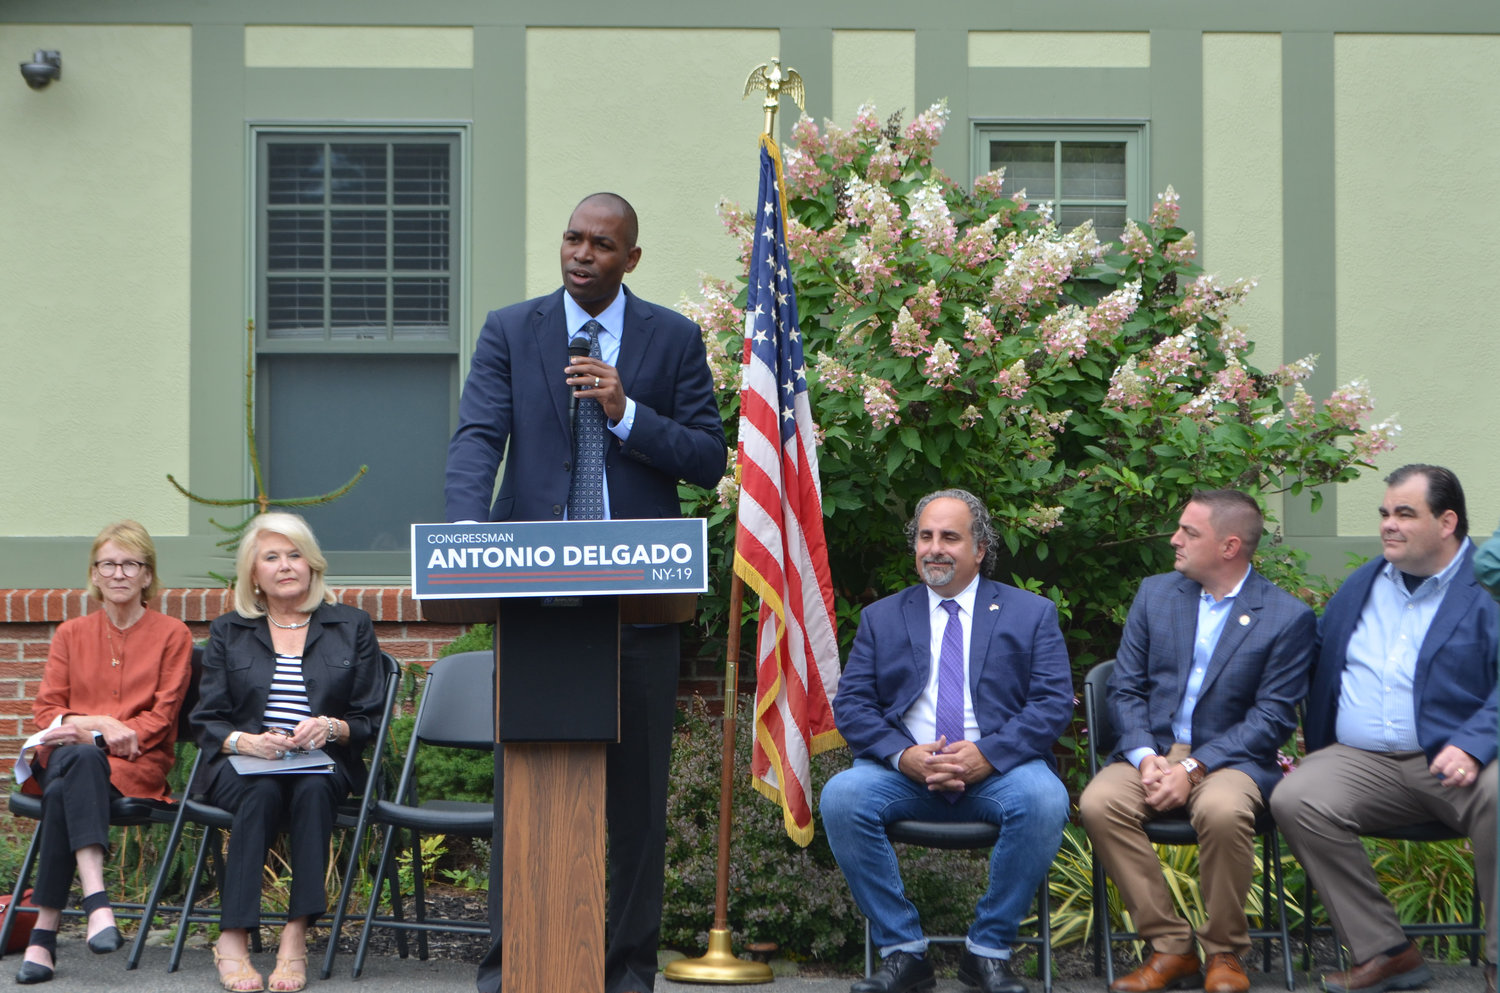 Congressman Antonio Delgado (NY-19) speaks to the importance of local leadership in ensuring funding for the O&W Trail, in front of NY State Assemblywoman Aileen Gunther, back left, Gerry Foundation Chairwoman Sandra Gerry, Town of Fallsburg Supervisor Steven Vegilante, NY State Senator Mike Martucci and Sullivan County legislative chair Rob Doherty.